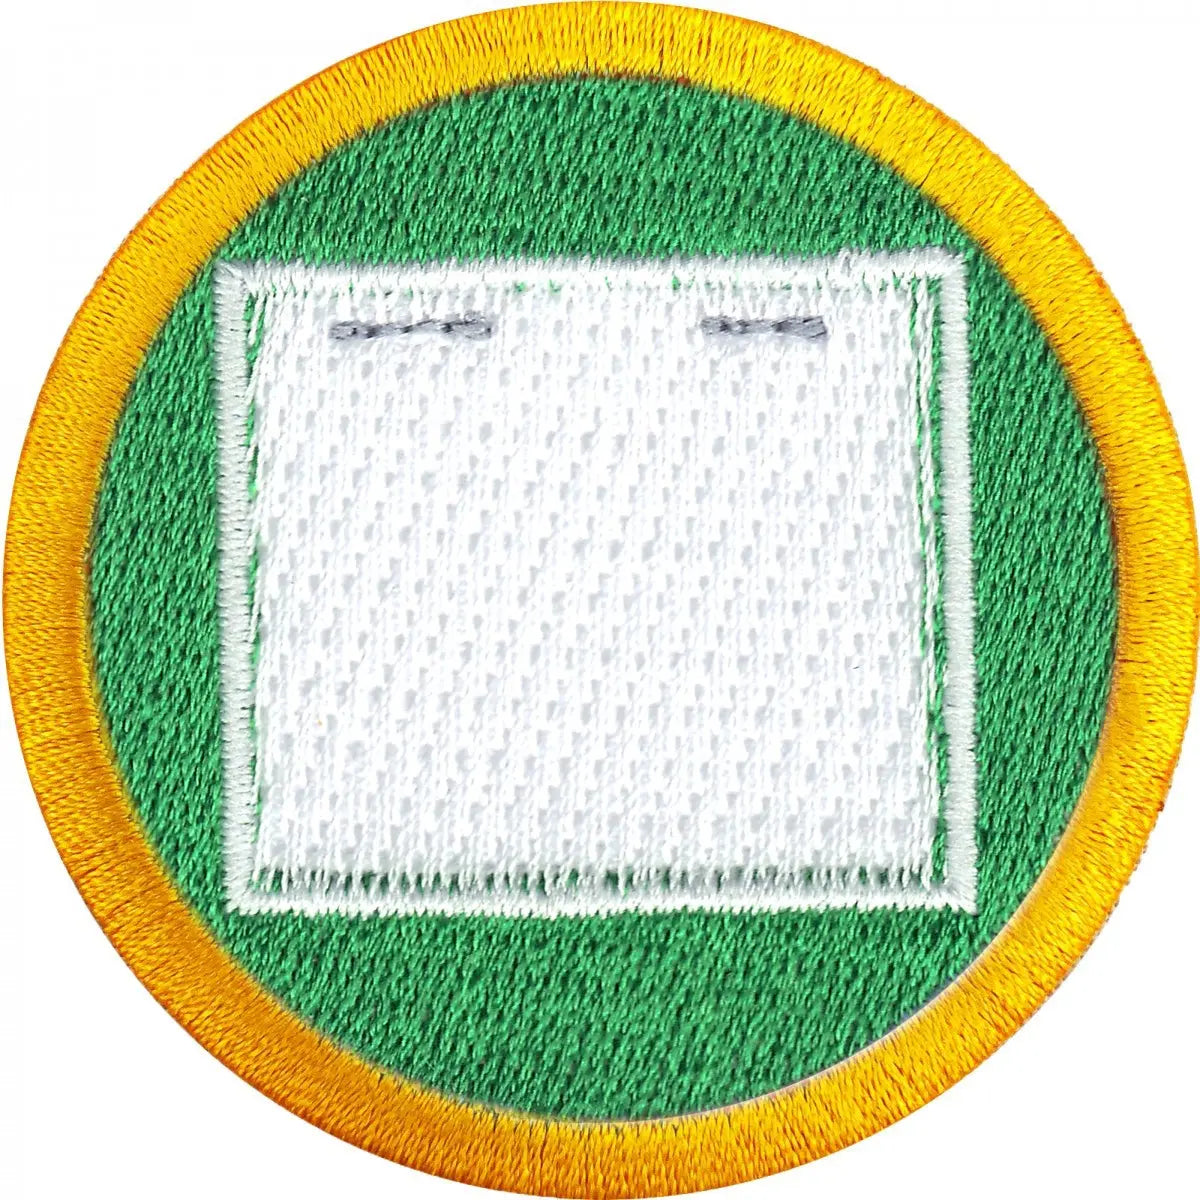 Tutoring Wilderness Scout Merit Badge Iron on Patch 